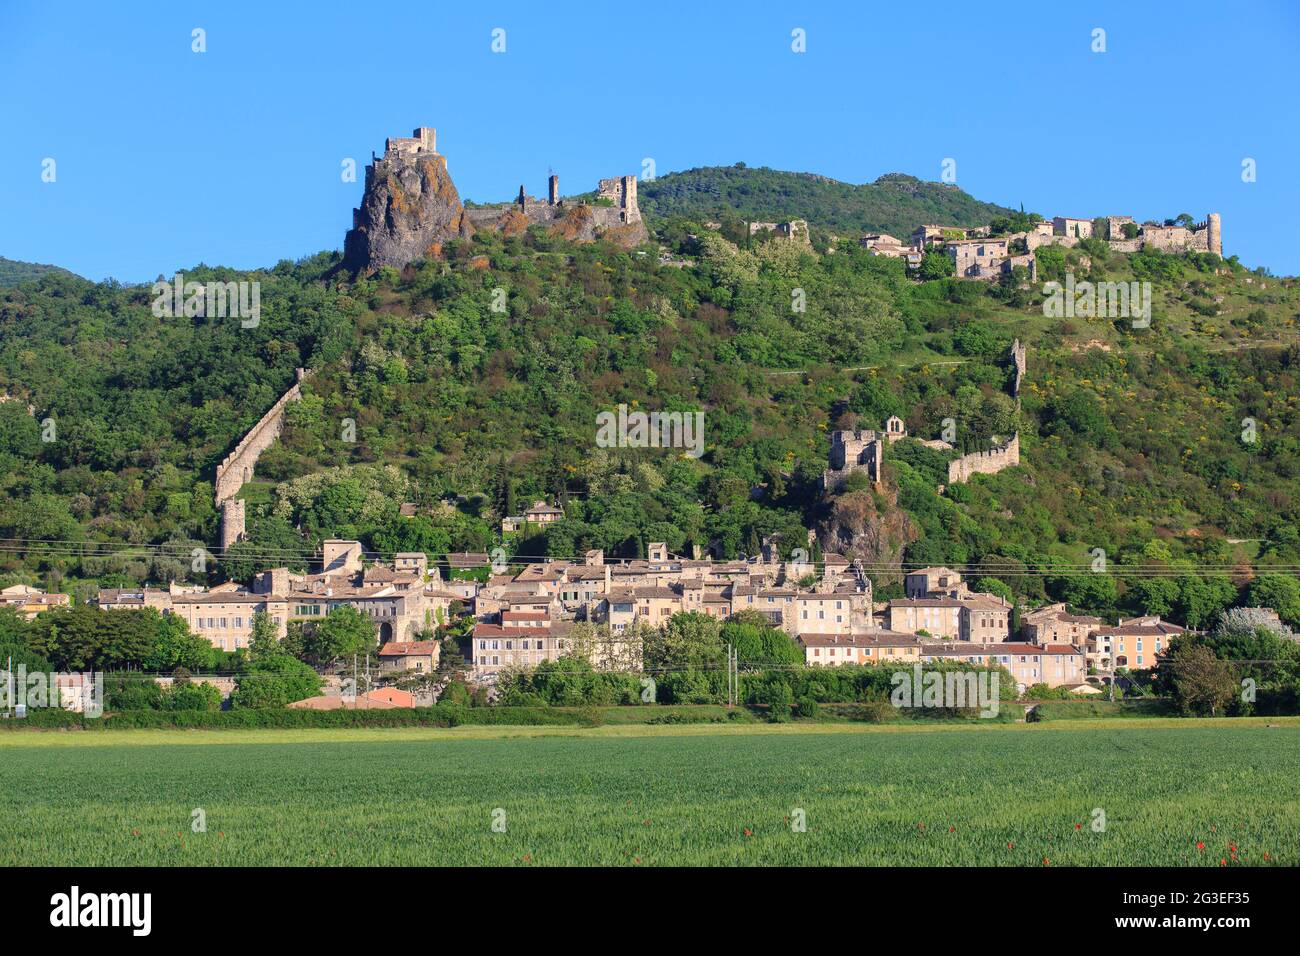 FRANCE. ARDECHE (07) ROCHEMAURE CASTLE AND VILLAGE OF ROCHEMAURE Stock Photo